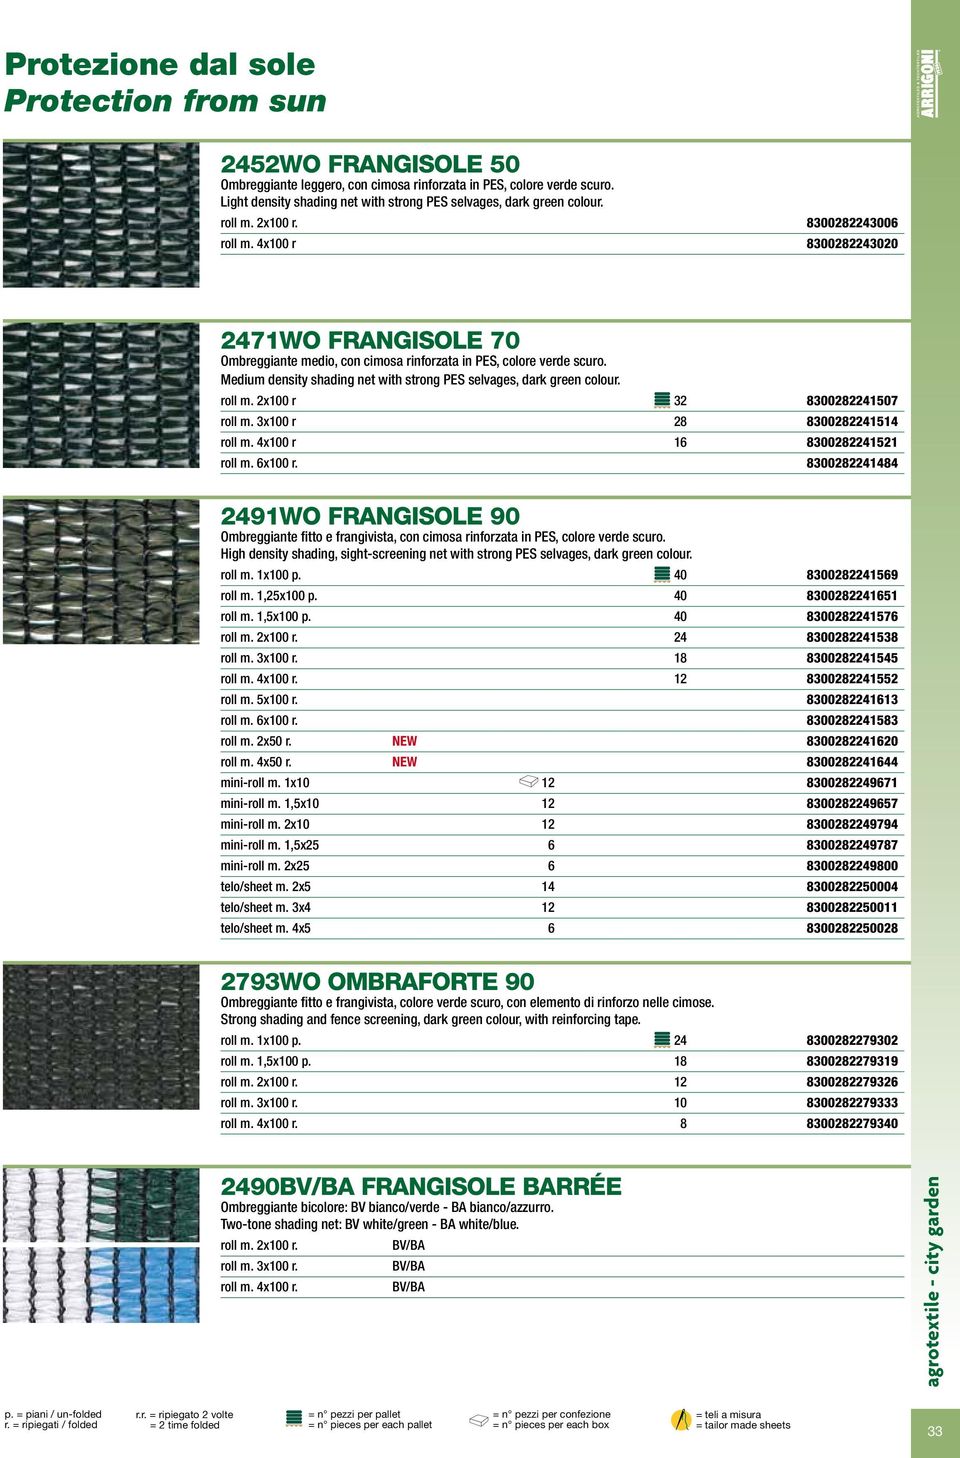 4x100 r 8300282243020 2471WO FRANGISOLE 70 Ombreggiante medio, con cimosa rinforzata in PES, colore verde scuro. Medium density shading net with strong PES selvages, dark green colour. roll m.